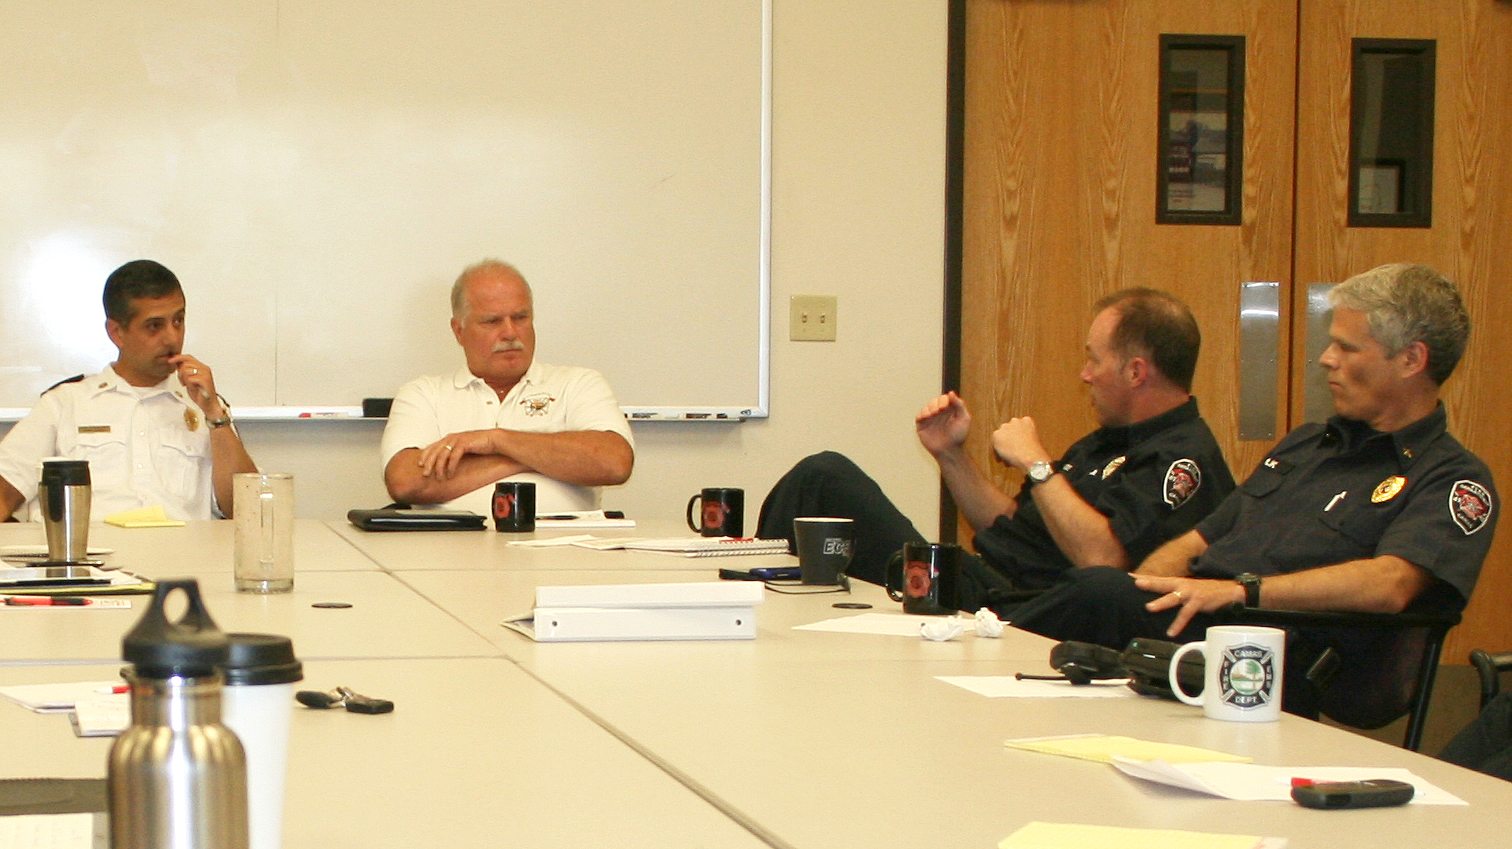 Last Wednesday was the first day of a six-month trial consolidation period between the Camas and Washougal fire departments. The day included the first combined command staff meeting with Camas and Washougal officers. The meetings will be held on a monthly basis. Pictured above (left to right) are Camas Fire Chief Nick Swinhart, Washougal Fire Chief Ron Schumacher, Camas Emergency Medical Services Capt.